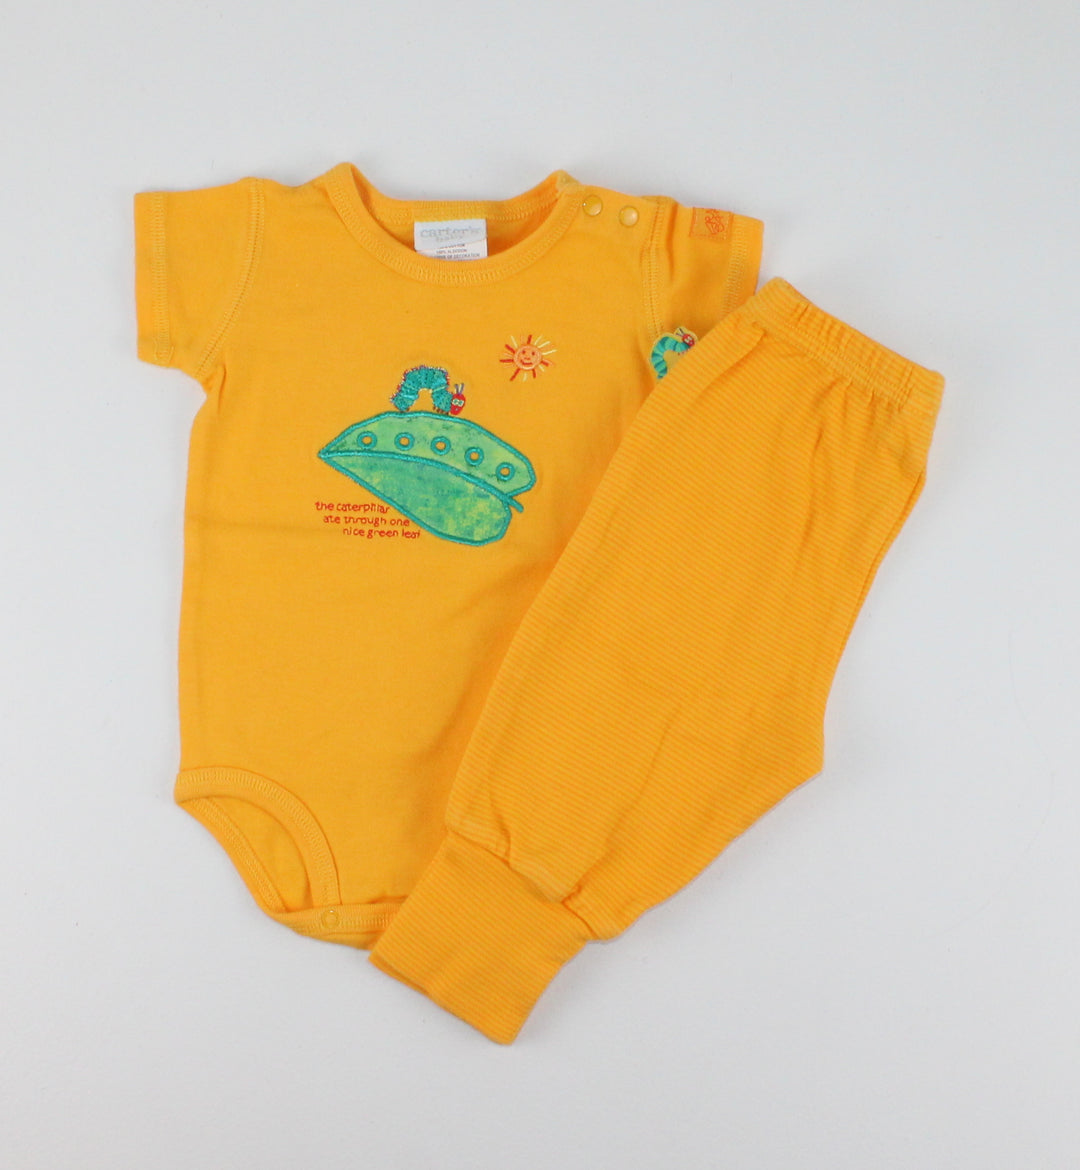 VINTAGE CARTERS HUNGRY CATEPILLAR YELLOW OUTFIT 0-3M EUC